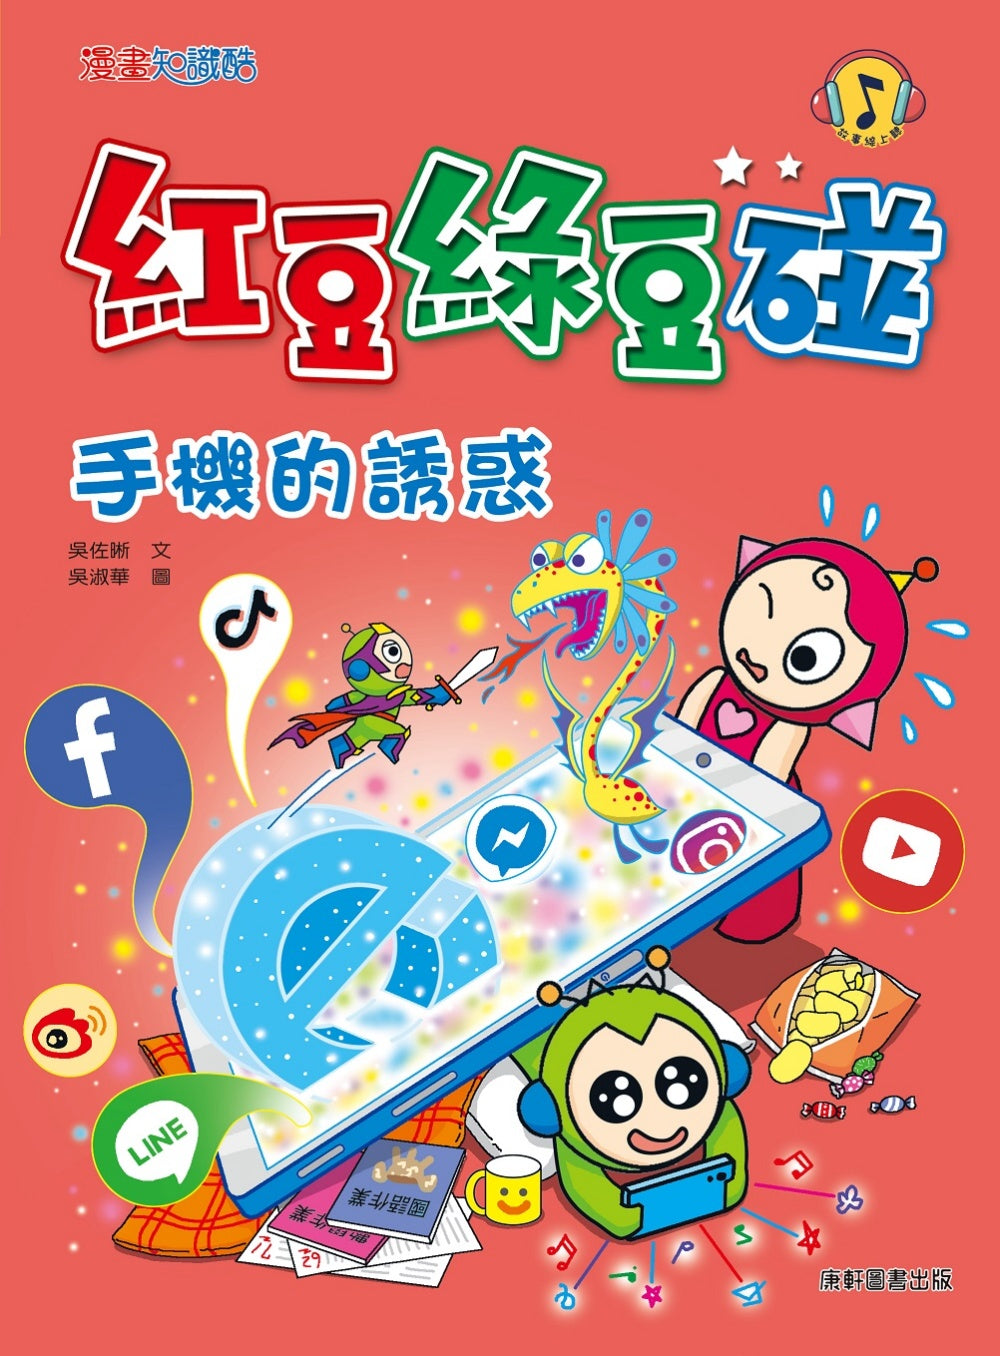 Red Bean Green Bean Manga #11: The Temptation of Cell Phones • 紅豆綠豆碰 #11：手機的誘惑